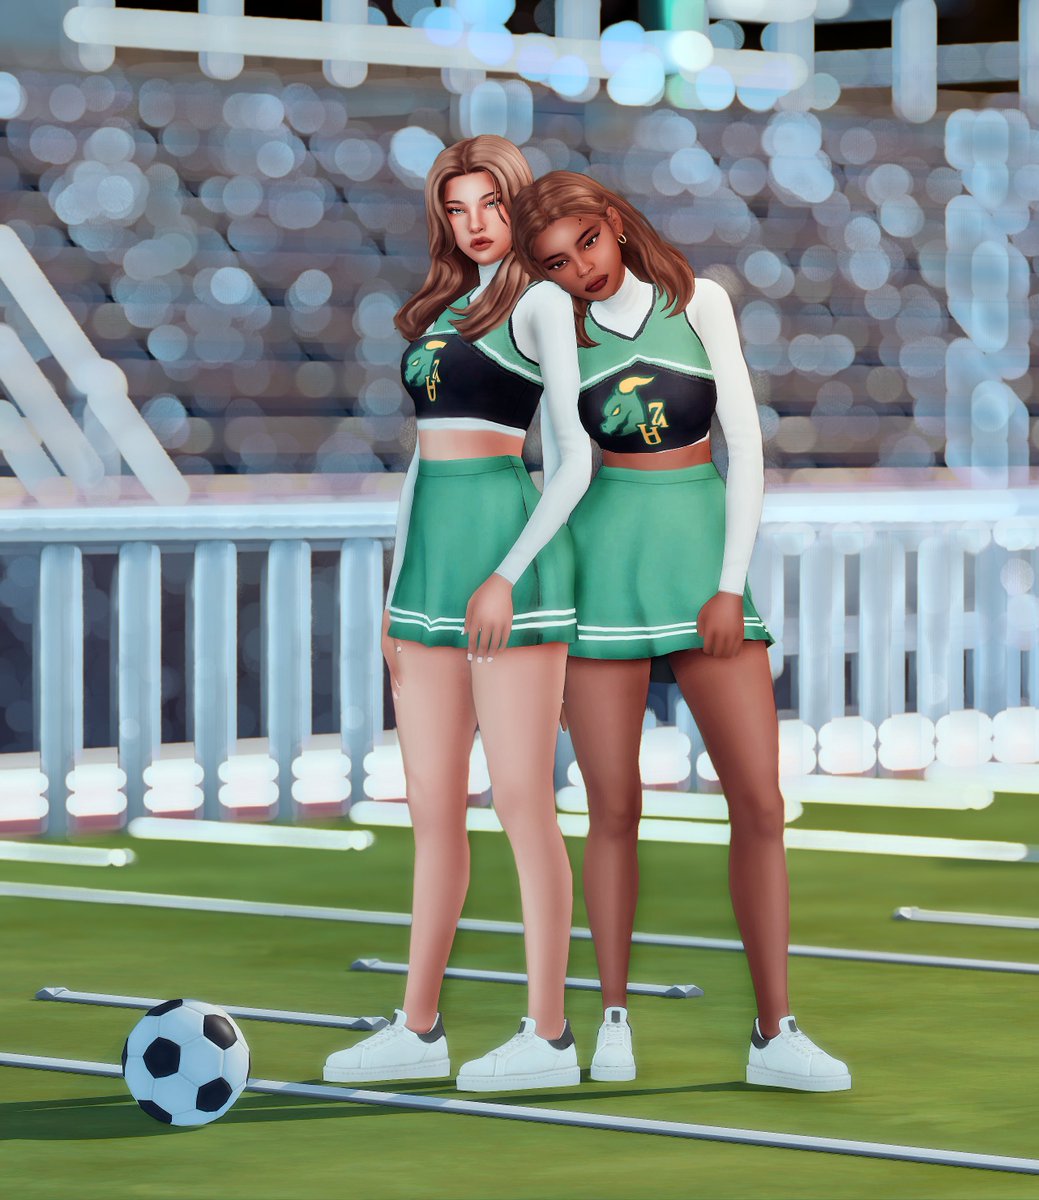 ft. Vera's best friend: Josephine Banks ⚽

#TheSims4 #ShowUsYourSims